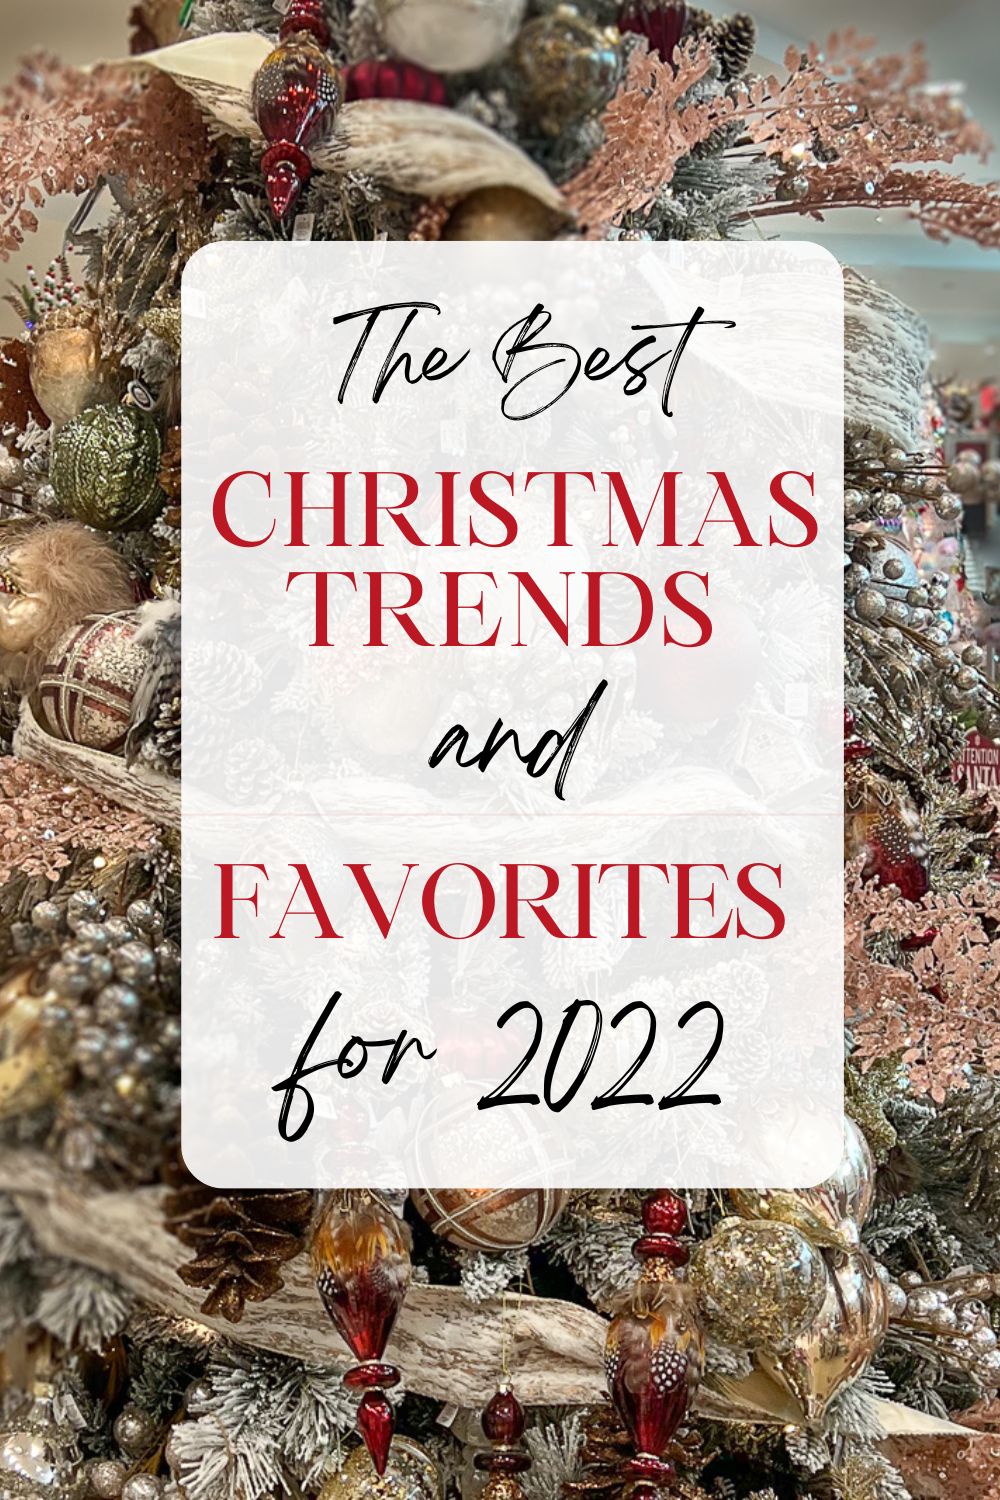 Christmas Decorating Trends and Favorites for 2022